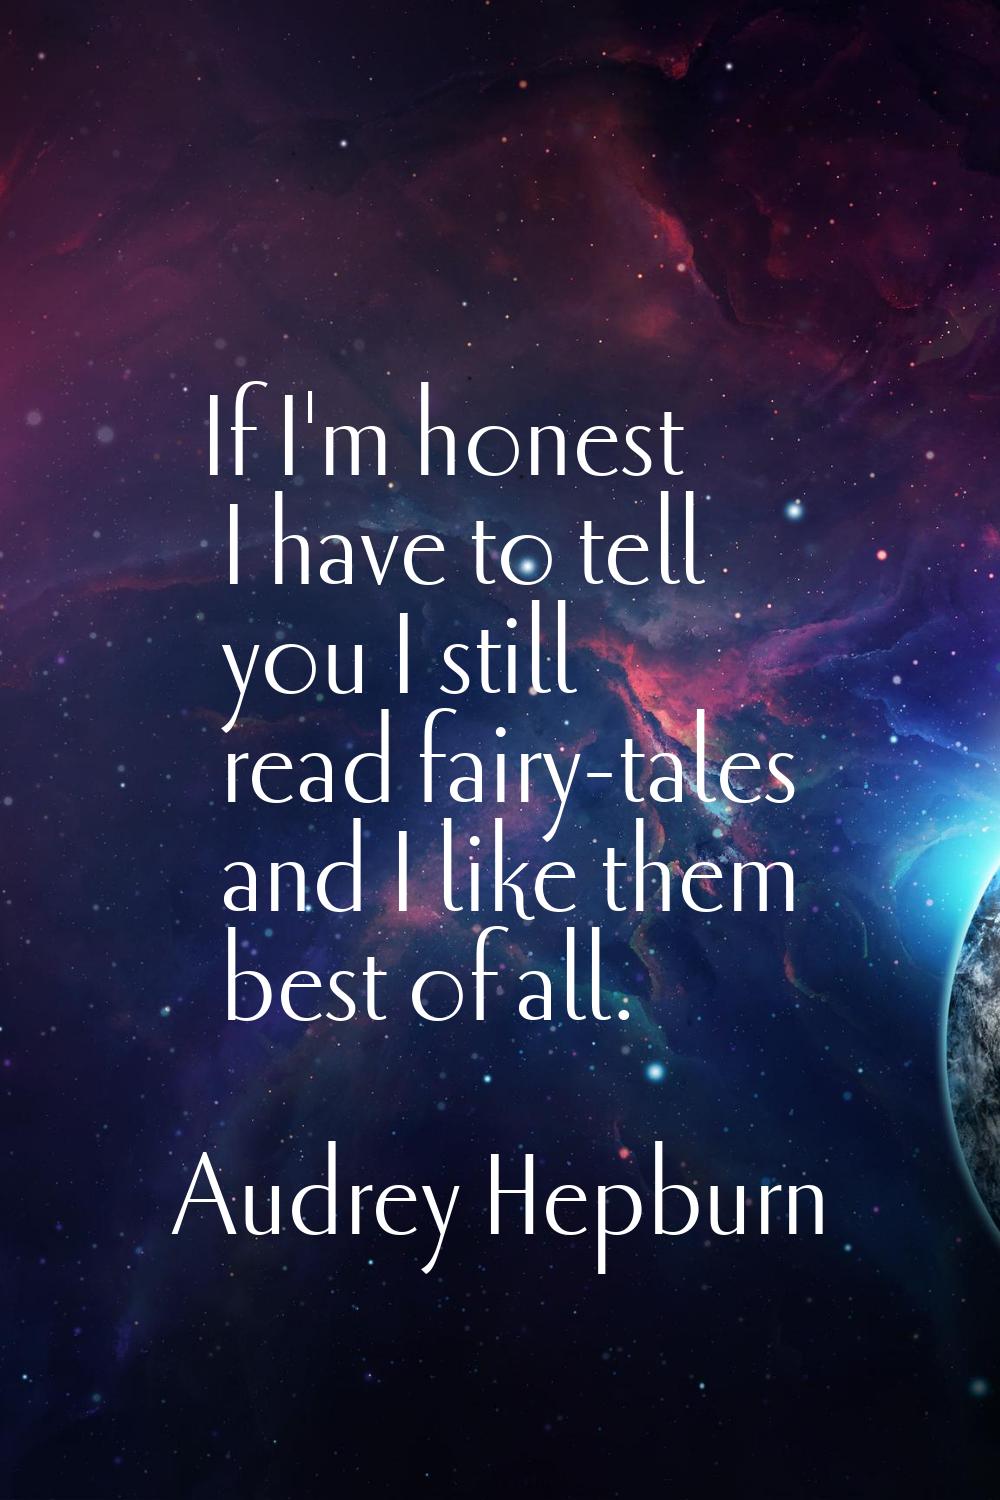 If I'm honest I have to tell you I still read fairy-tales and I like them best of all.